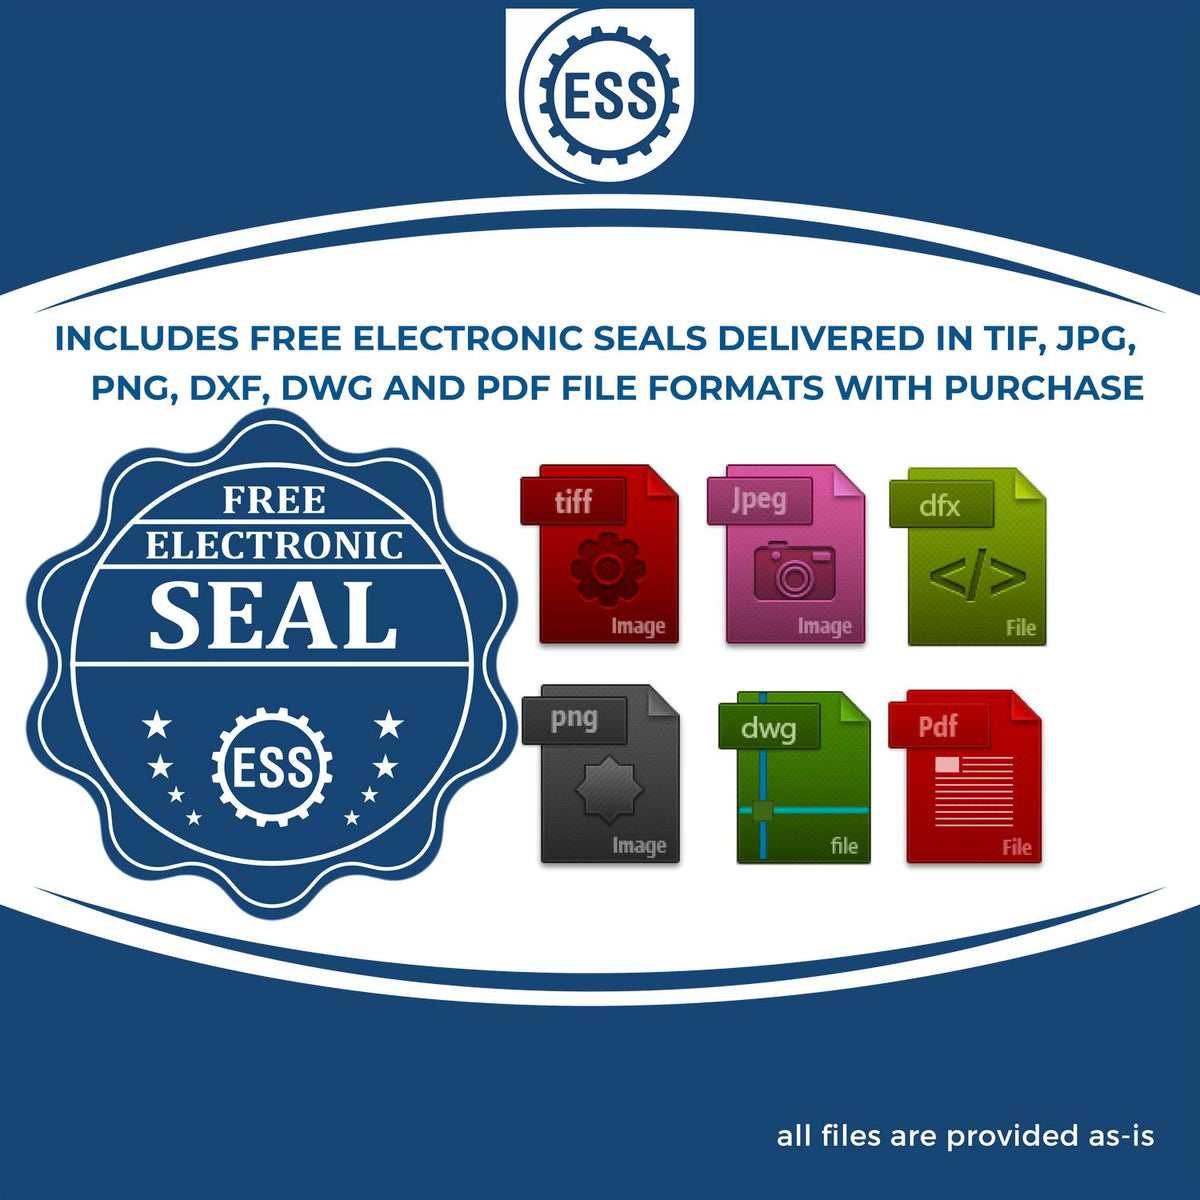 An infographic for the free electronic seal for the Slim Pre-Inked Nevada Professional Engineer Seal Stamp illustrating the different file type icons such as DXF, DWG, TIF, JPG and PNG.